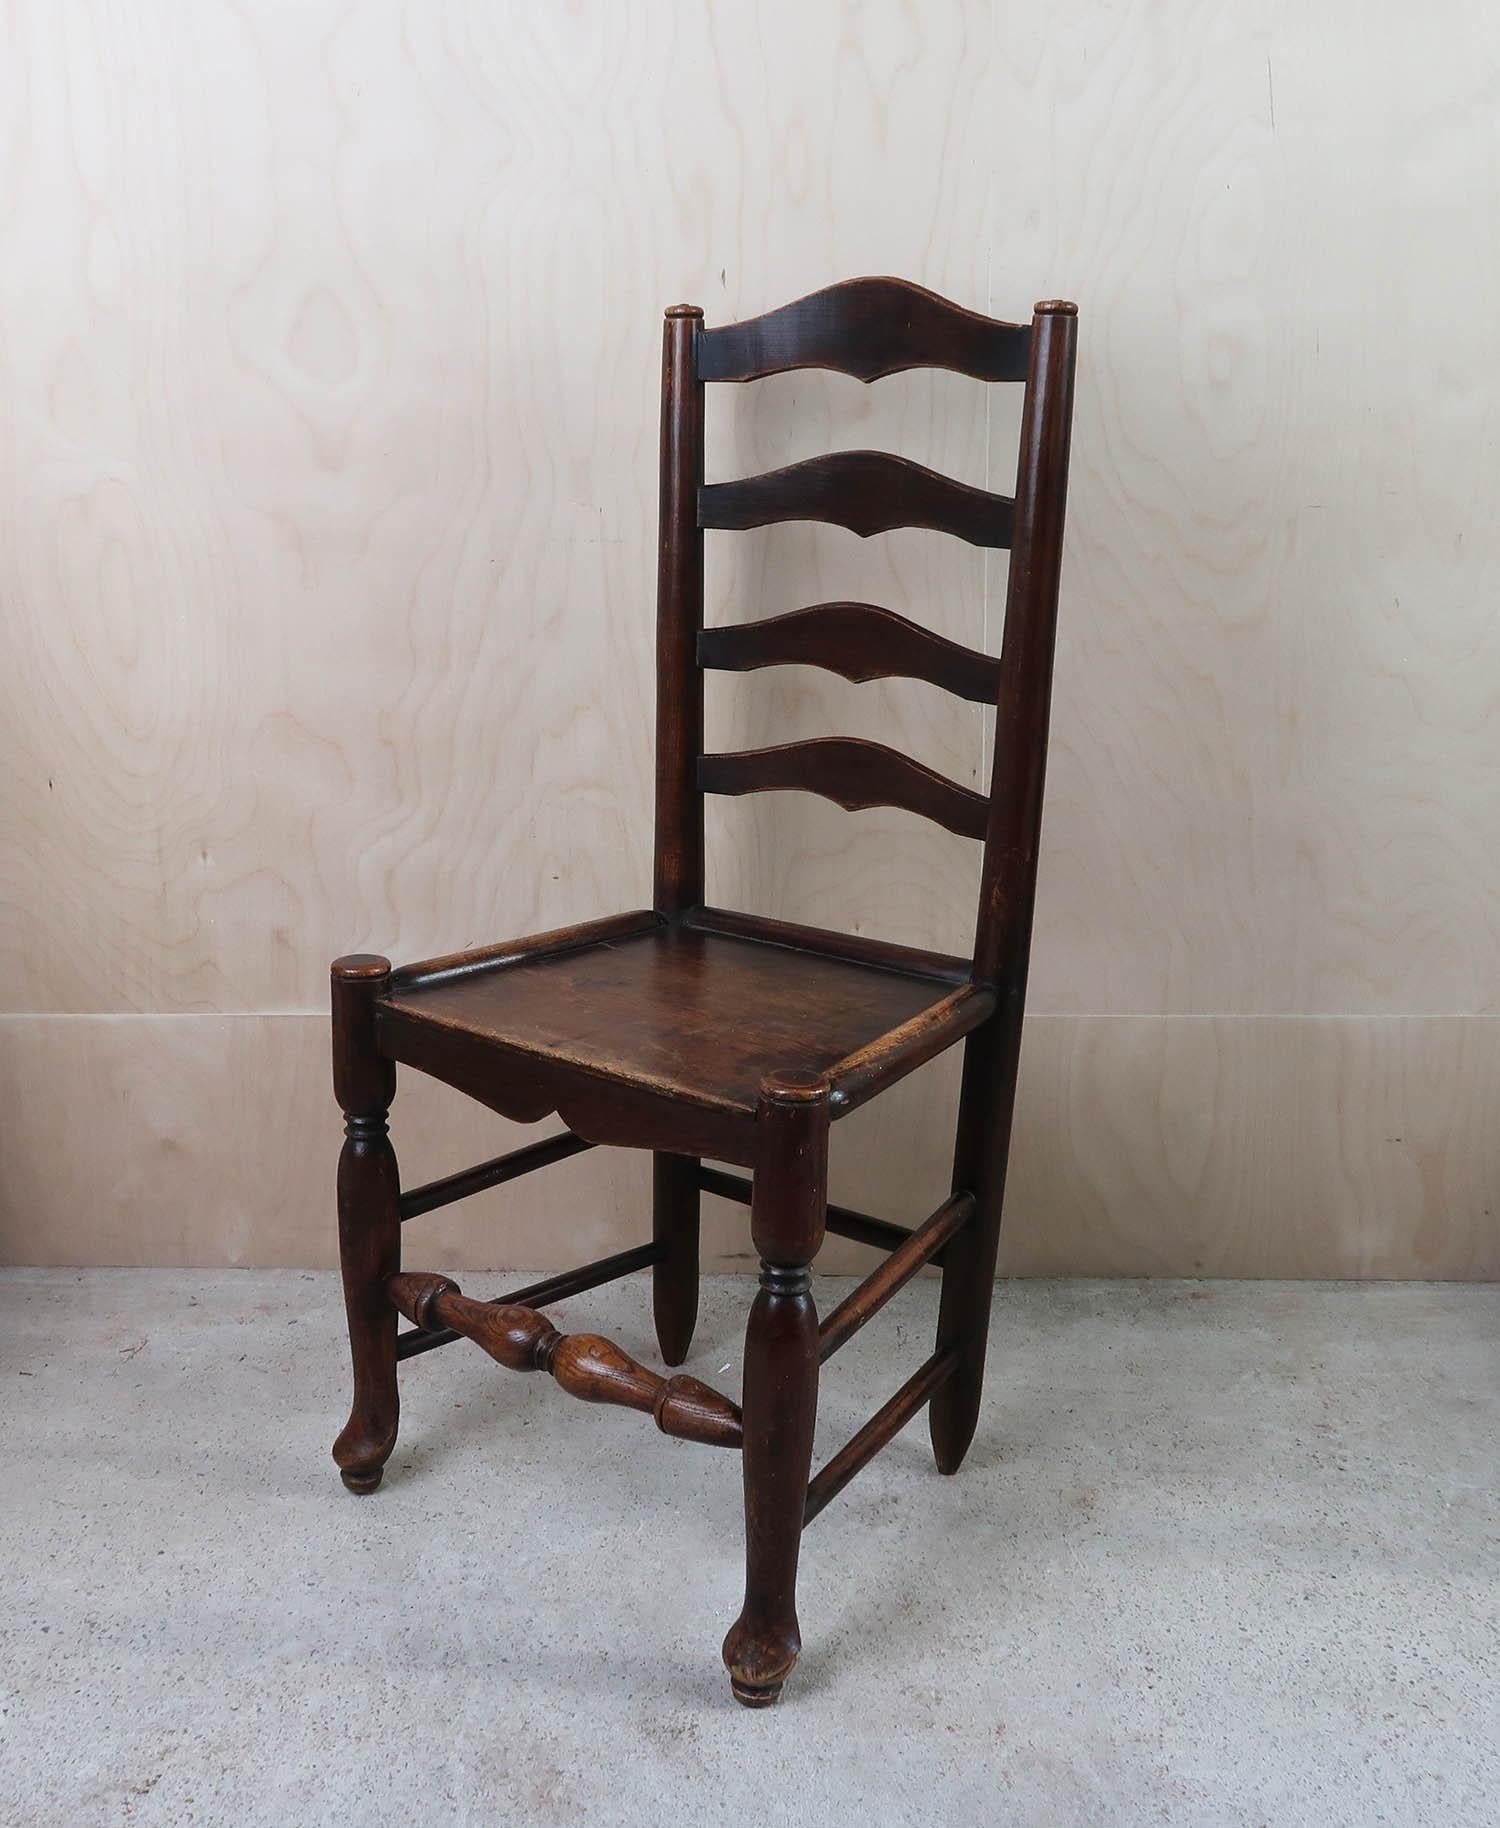 Near Pair of Antique Welsh Country Ladder back Chairs. C.1800 (Ulmenholz) im Angebot